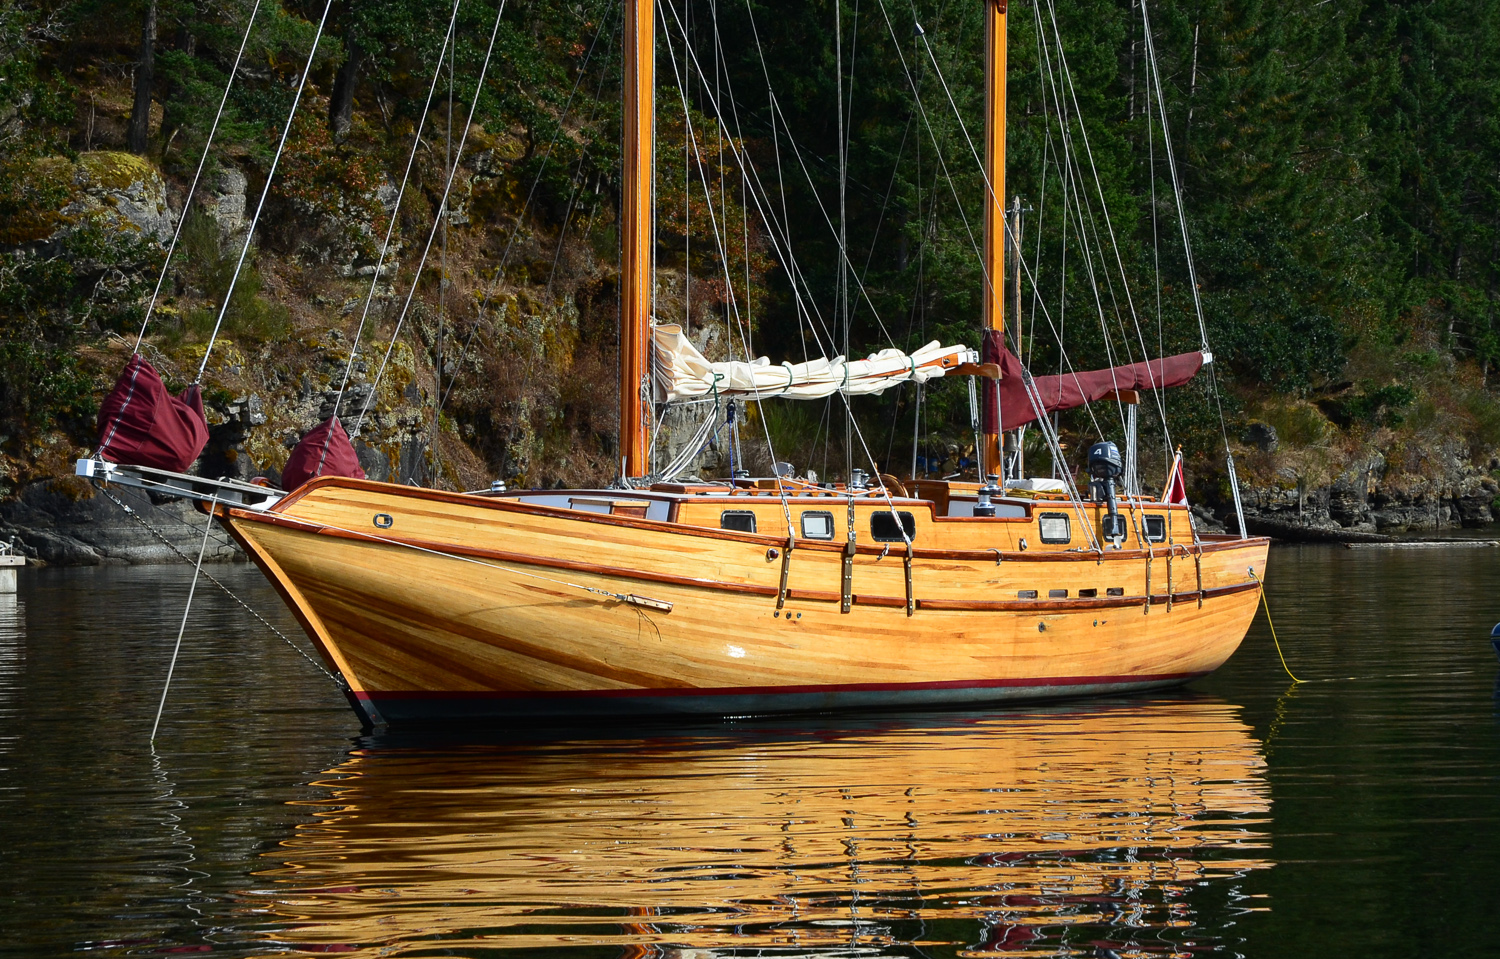 Pacific Wooden Boats | Wooden Boat Culture In The Pacific ...